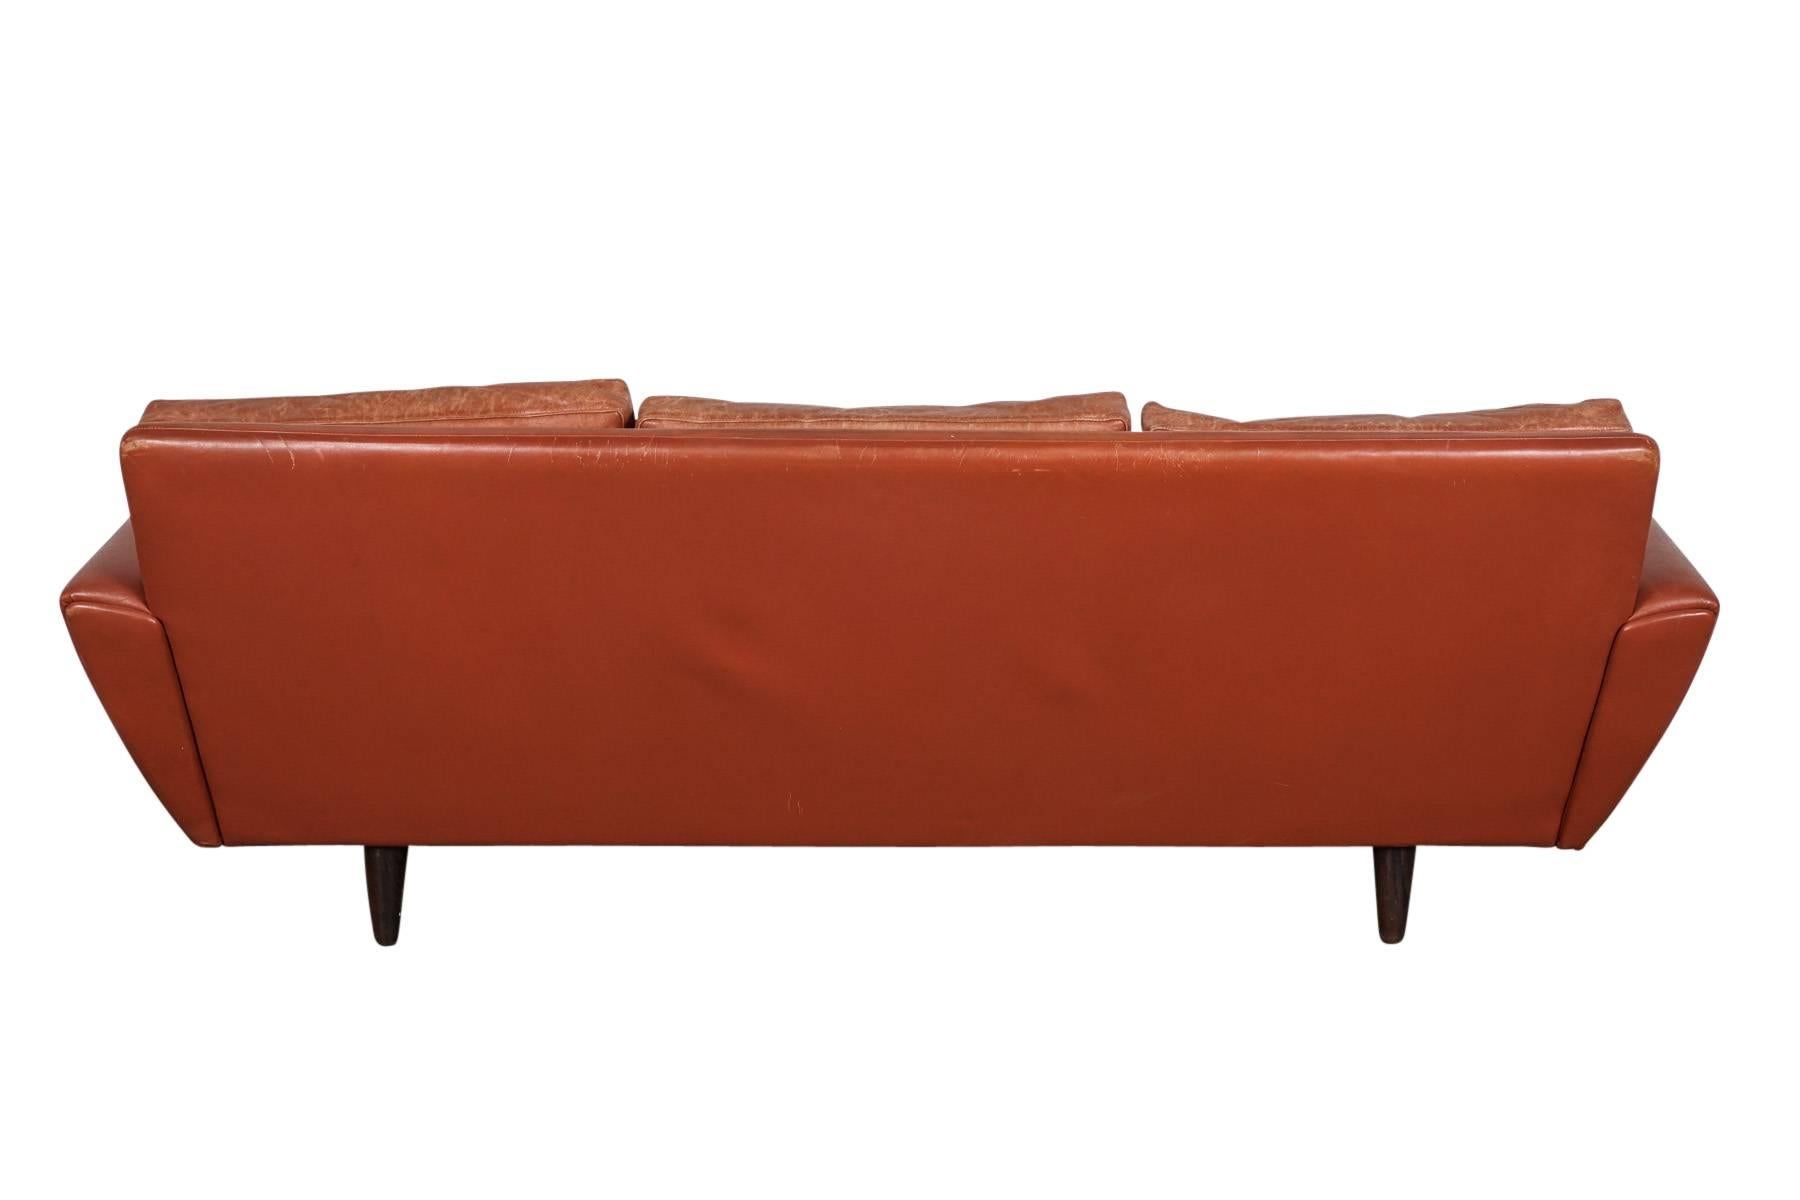 Danish Mid-Century Sofa in Red Leather Designed by Georg Thams 1